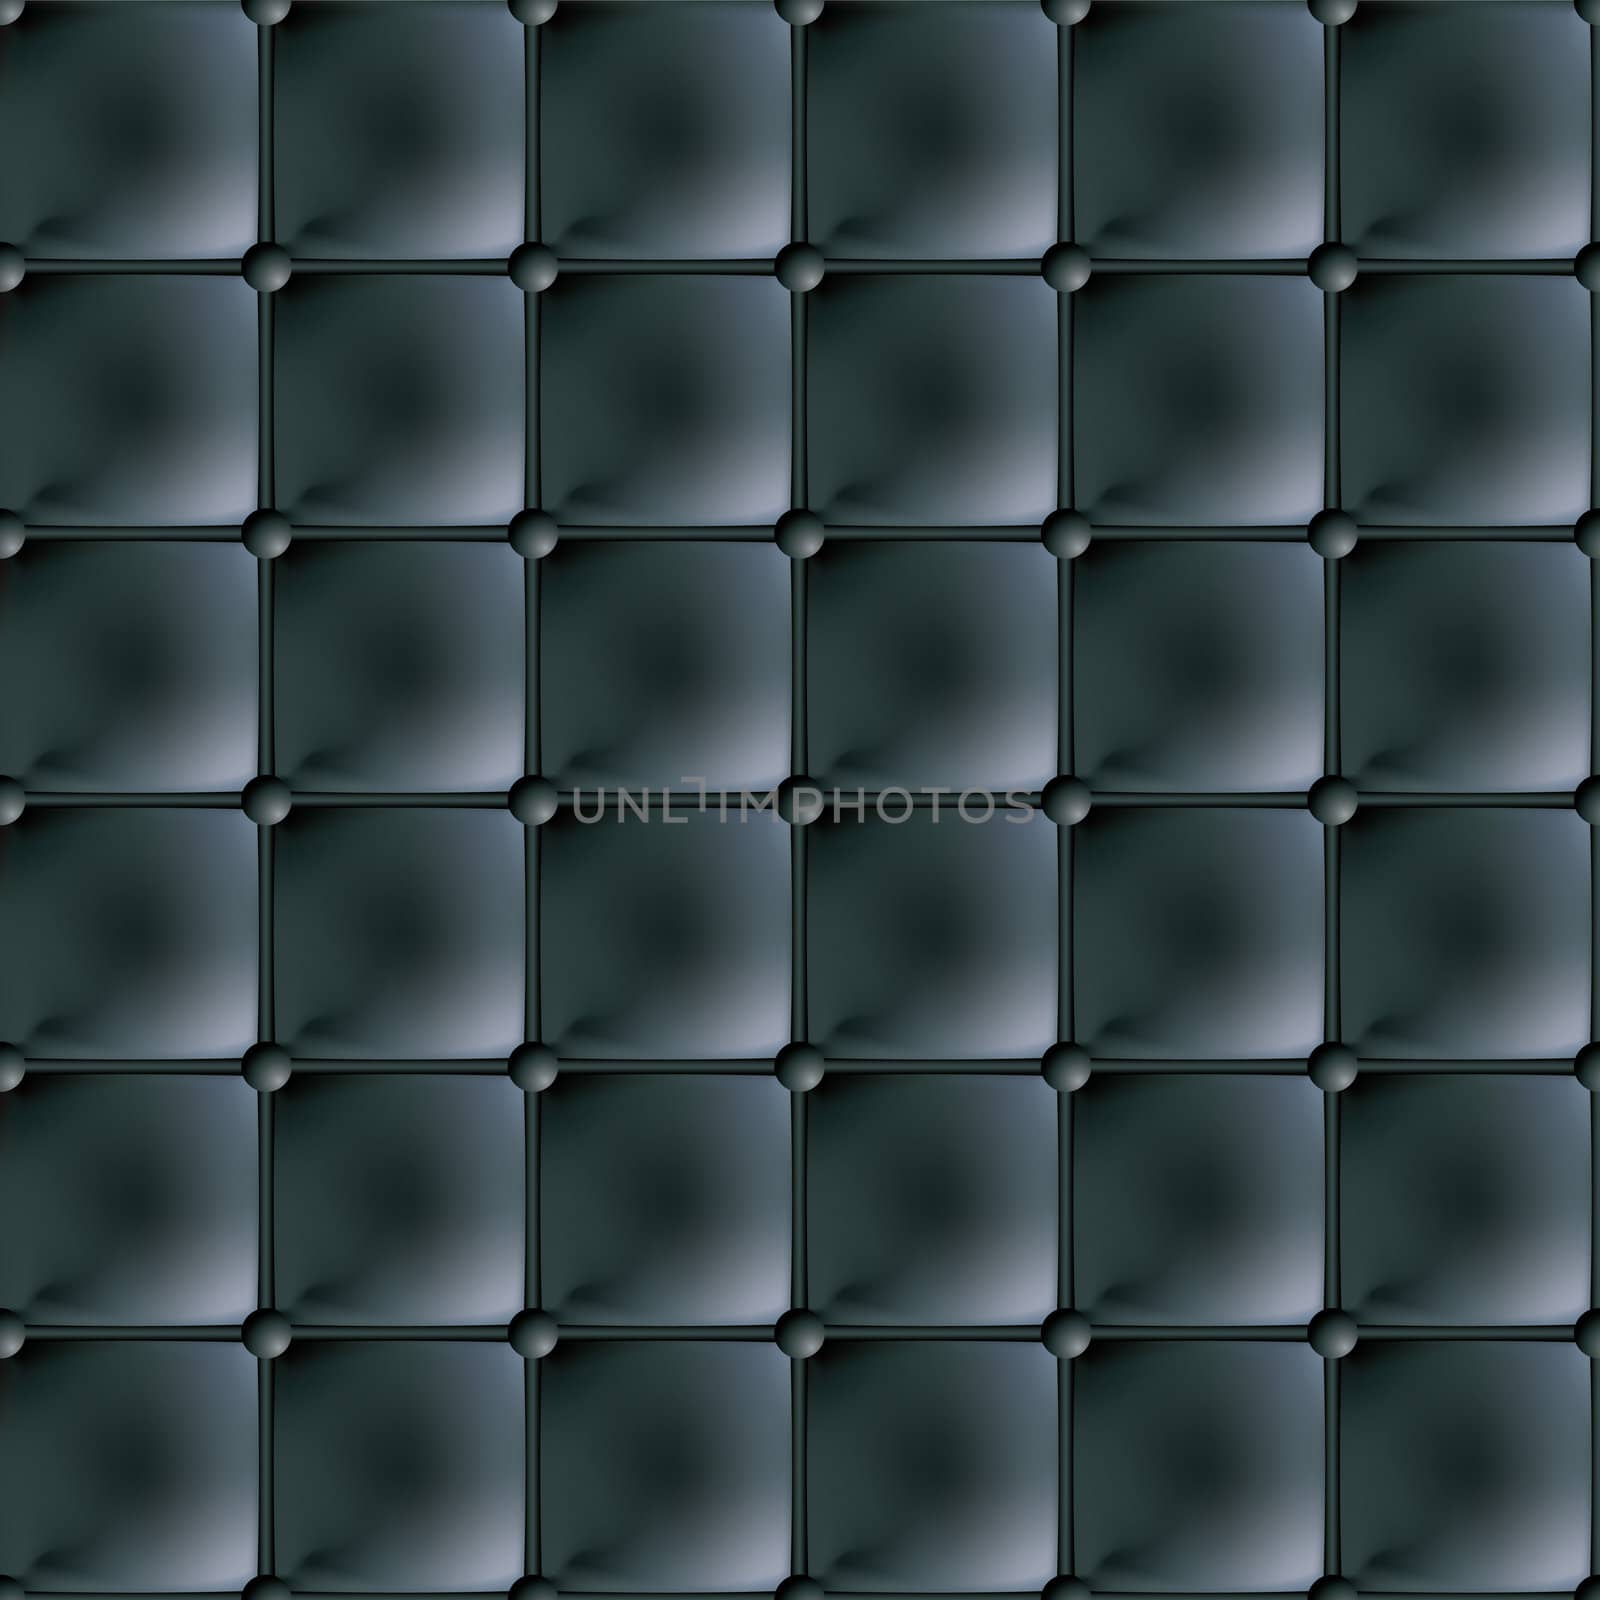 Black leather material background seamlessly tiled with buttons